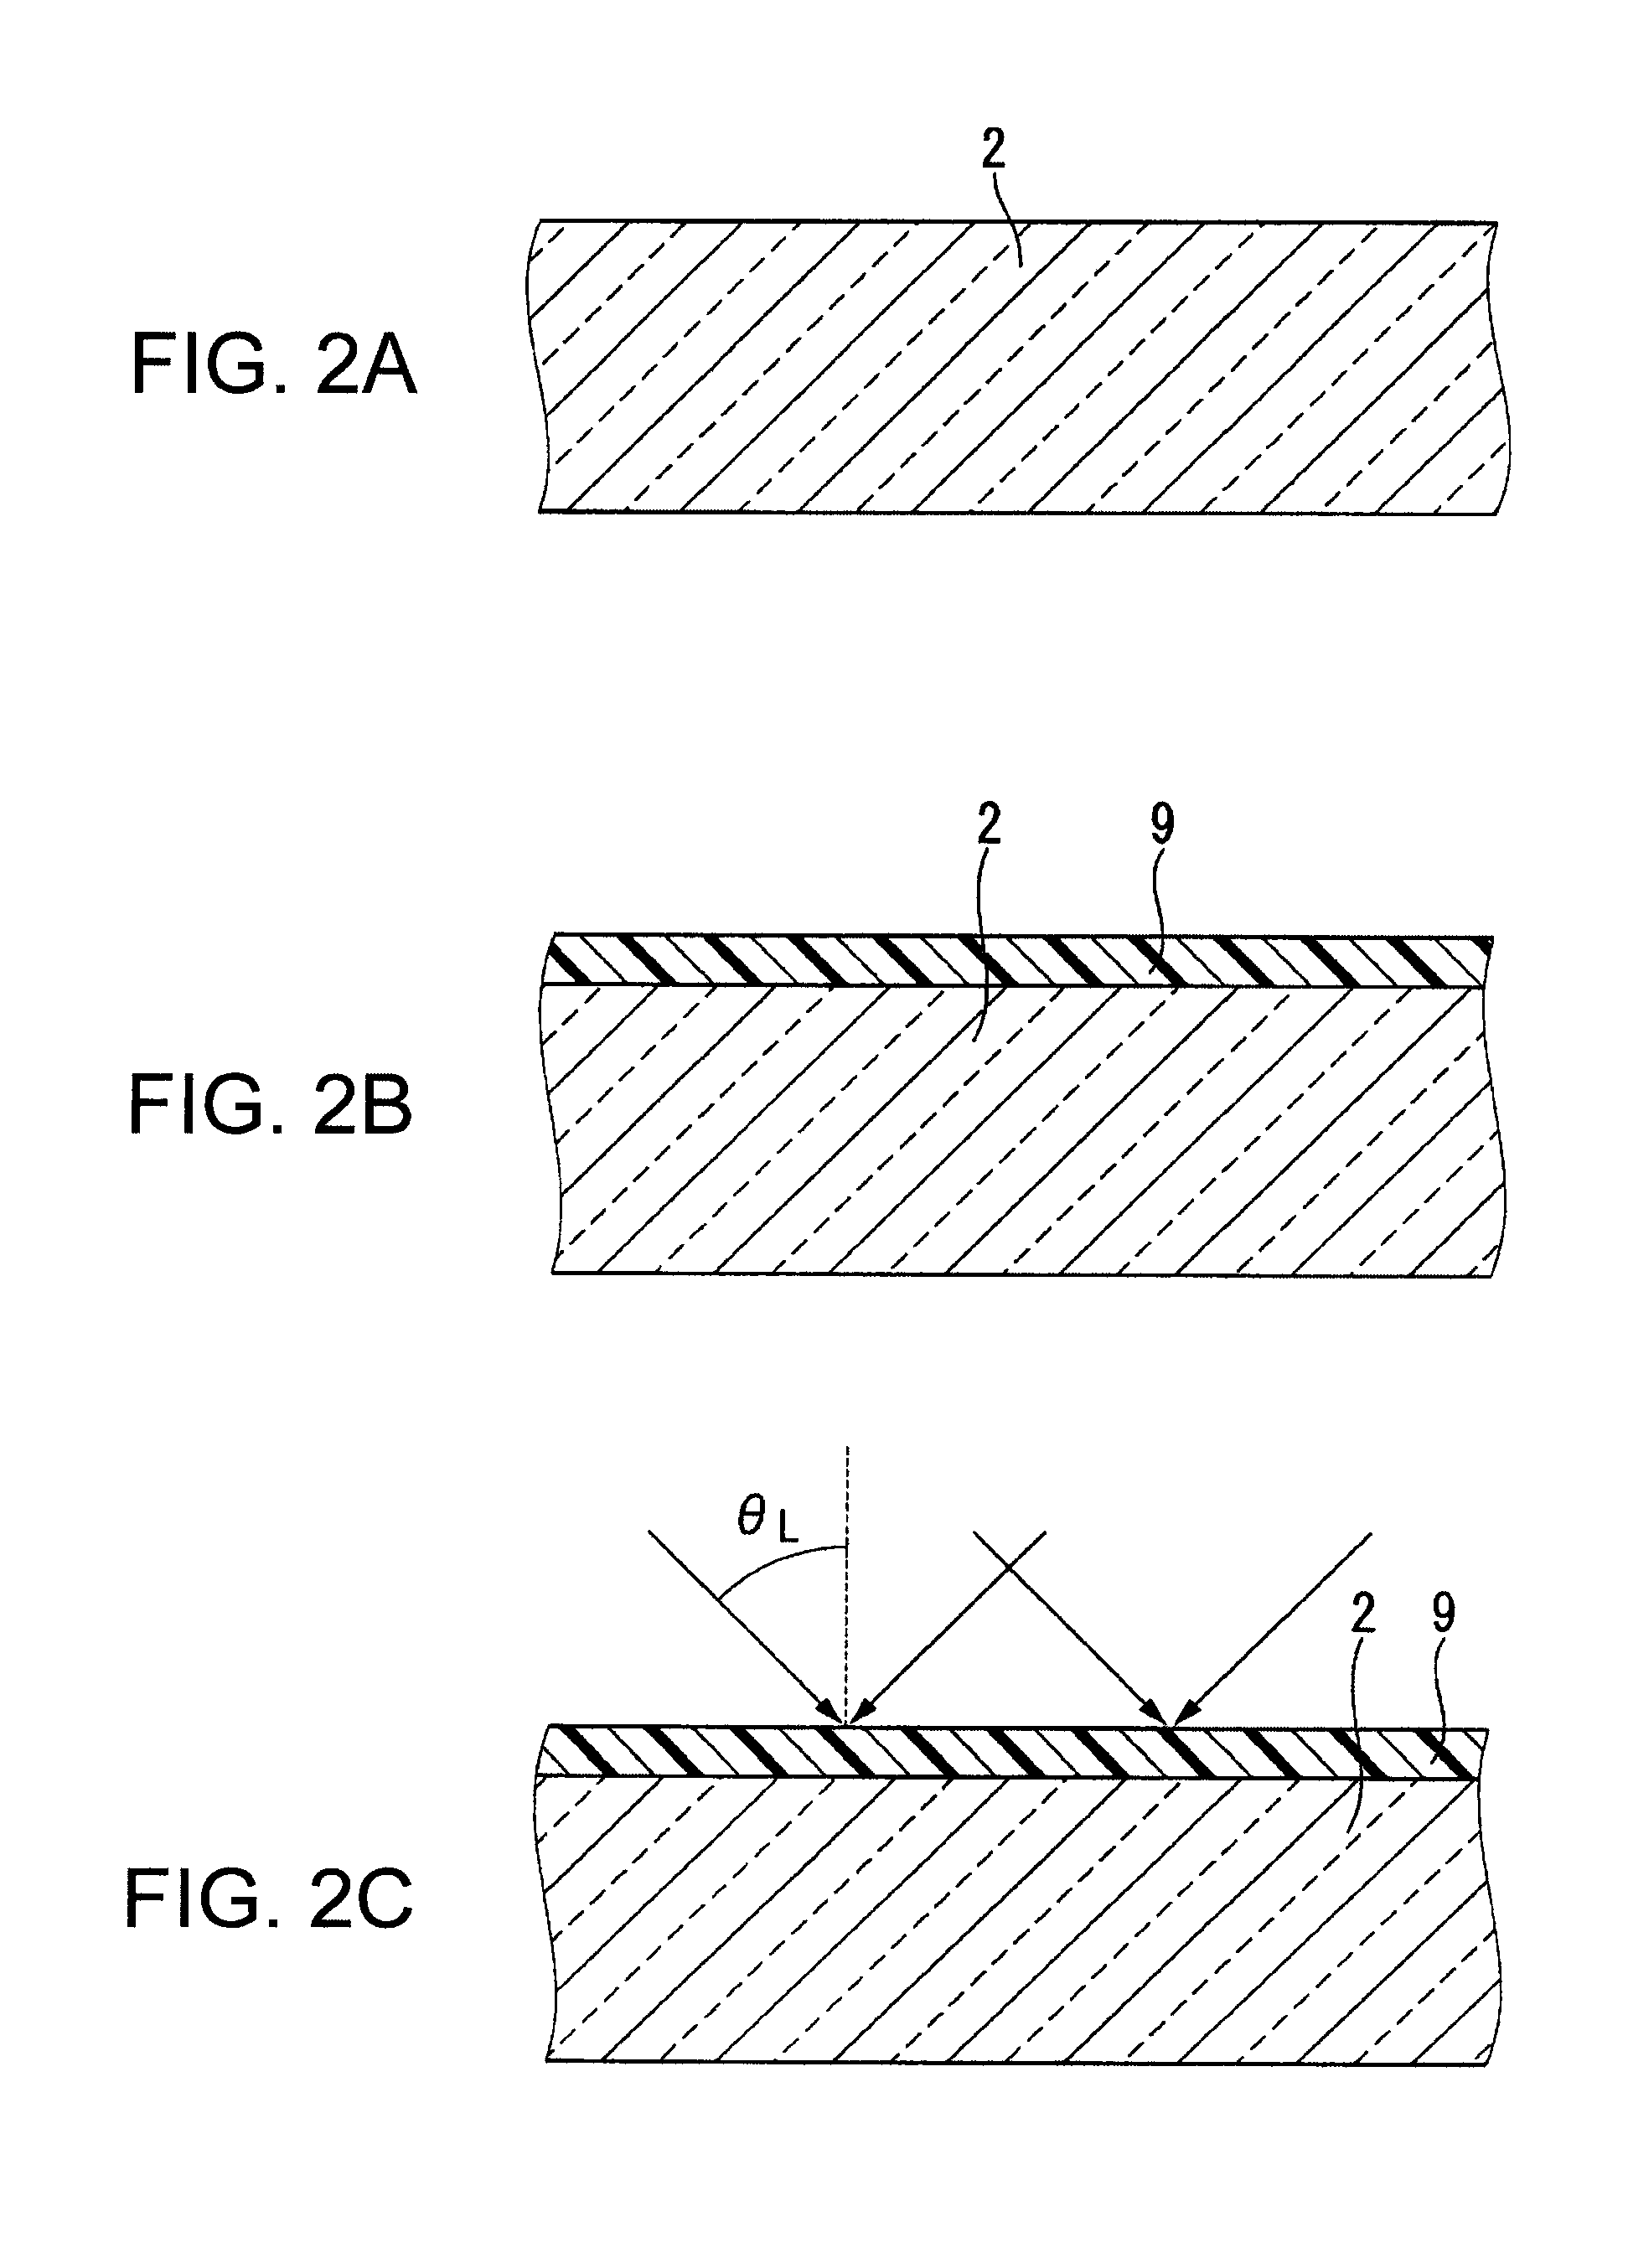 Method for manufacturing an optical element to polarize and split incident light